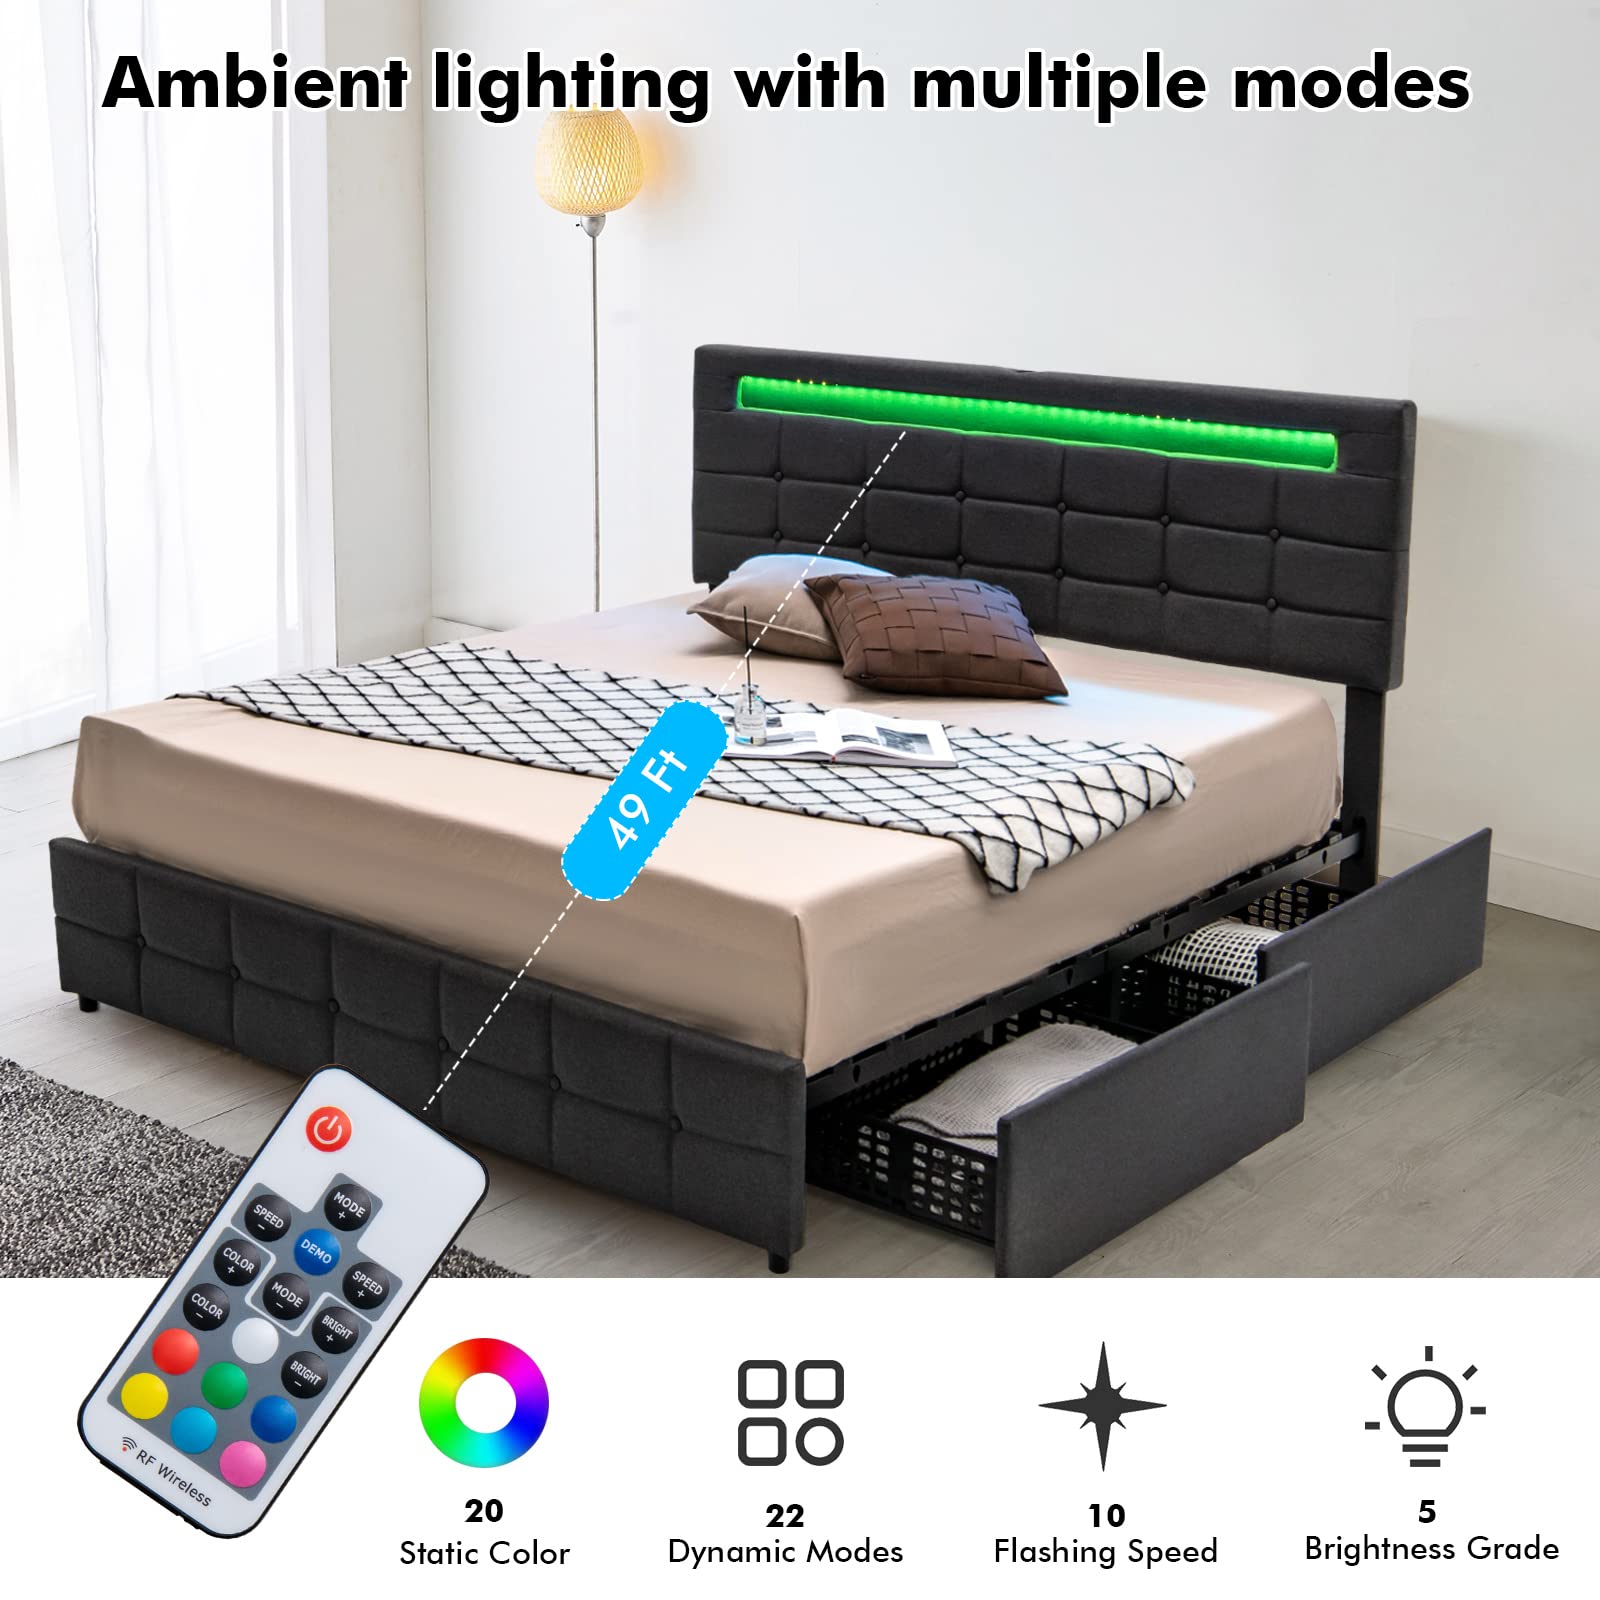 Giantex Queen Bed Frame with LED Lights and 4 Drawers, Upholstered Platform Bed Frame with USB Ports